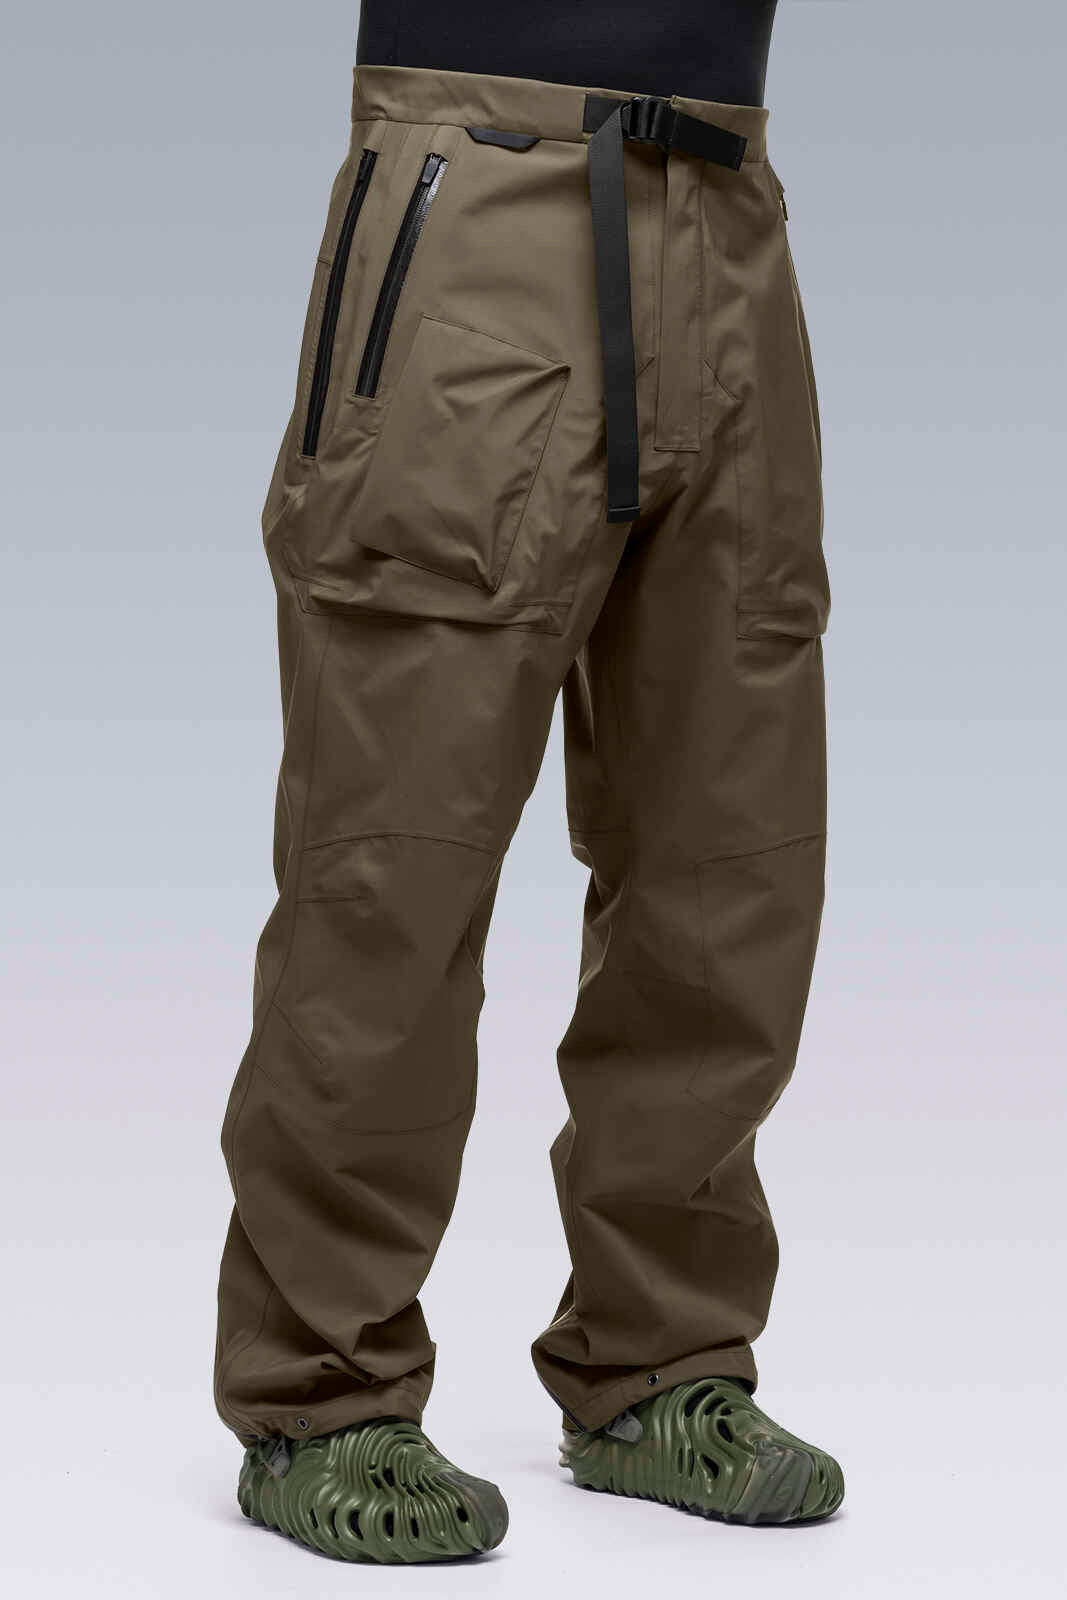 British Royal Air Force GoreTex OverTrousers  Grade 1  Forces Uniform  and Kit